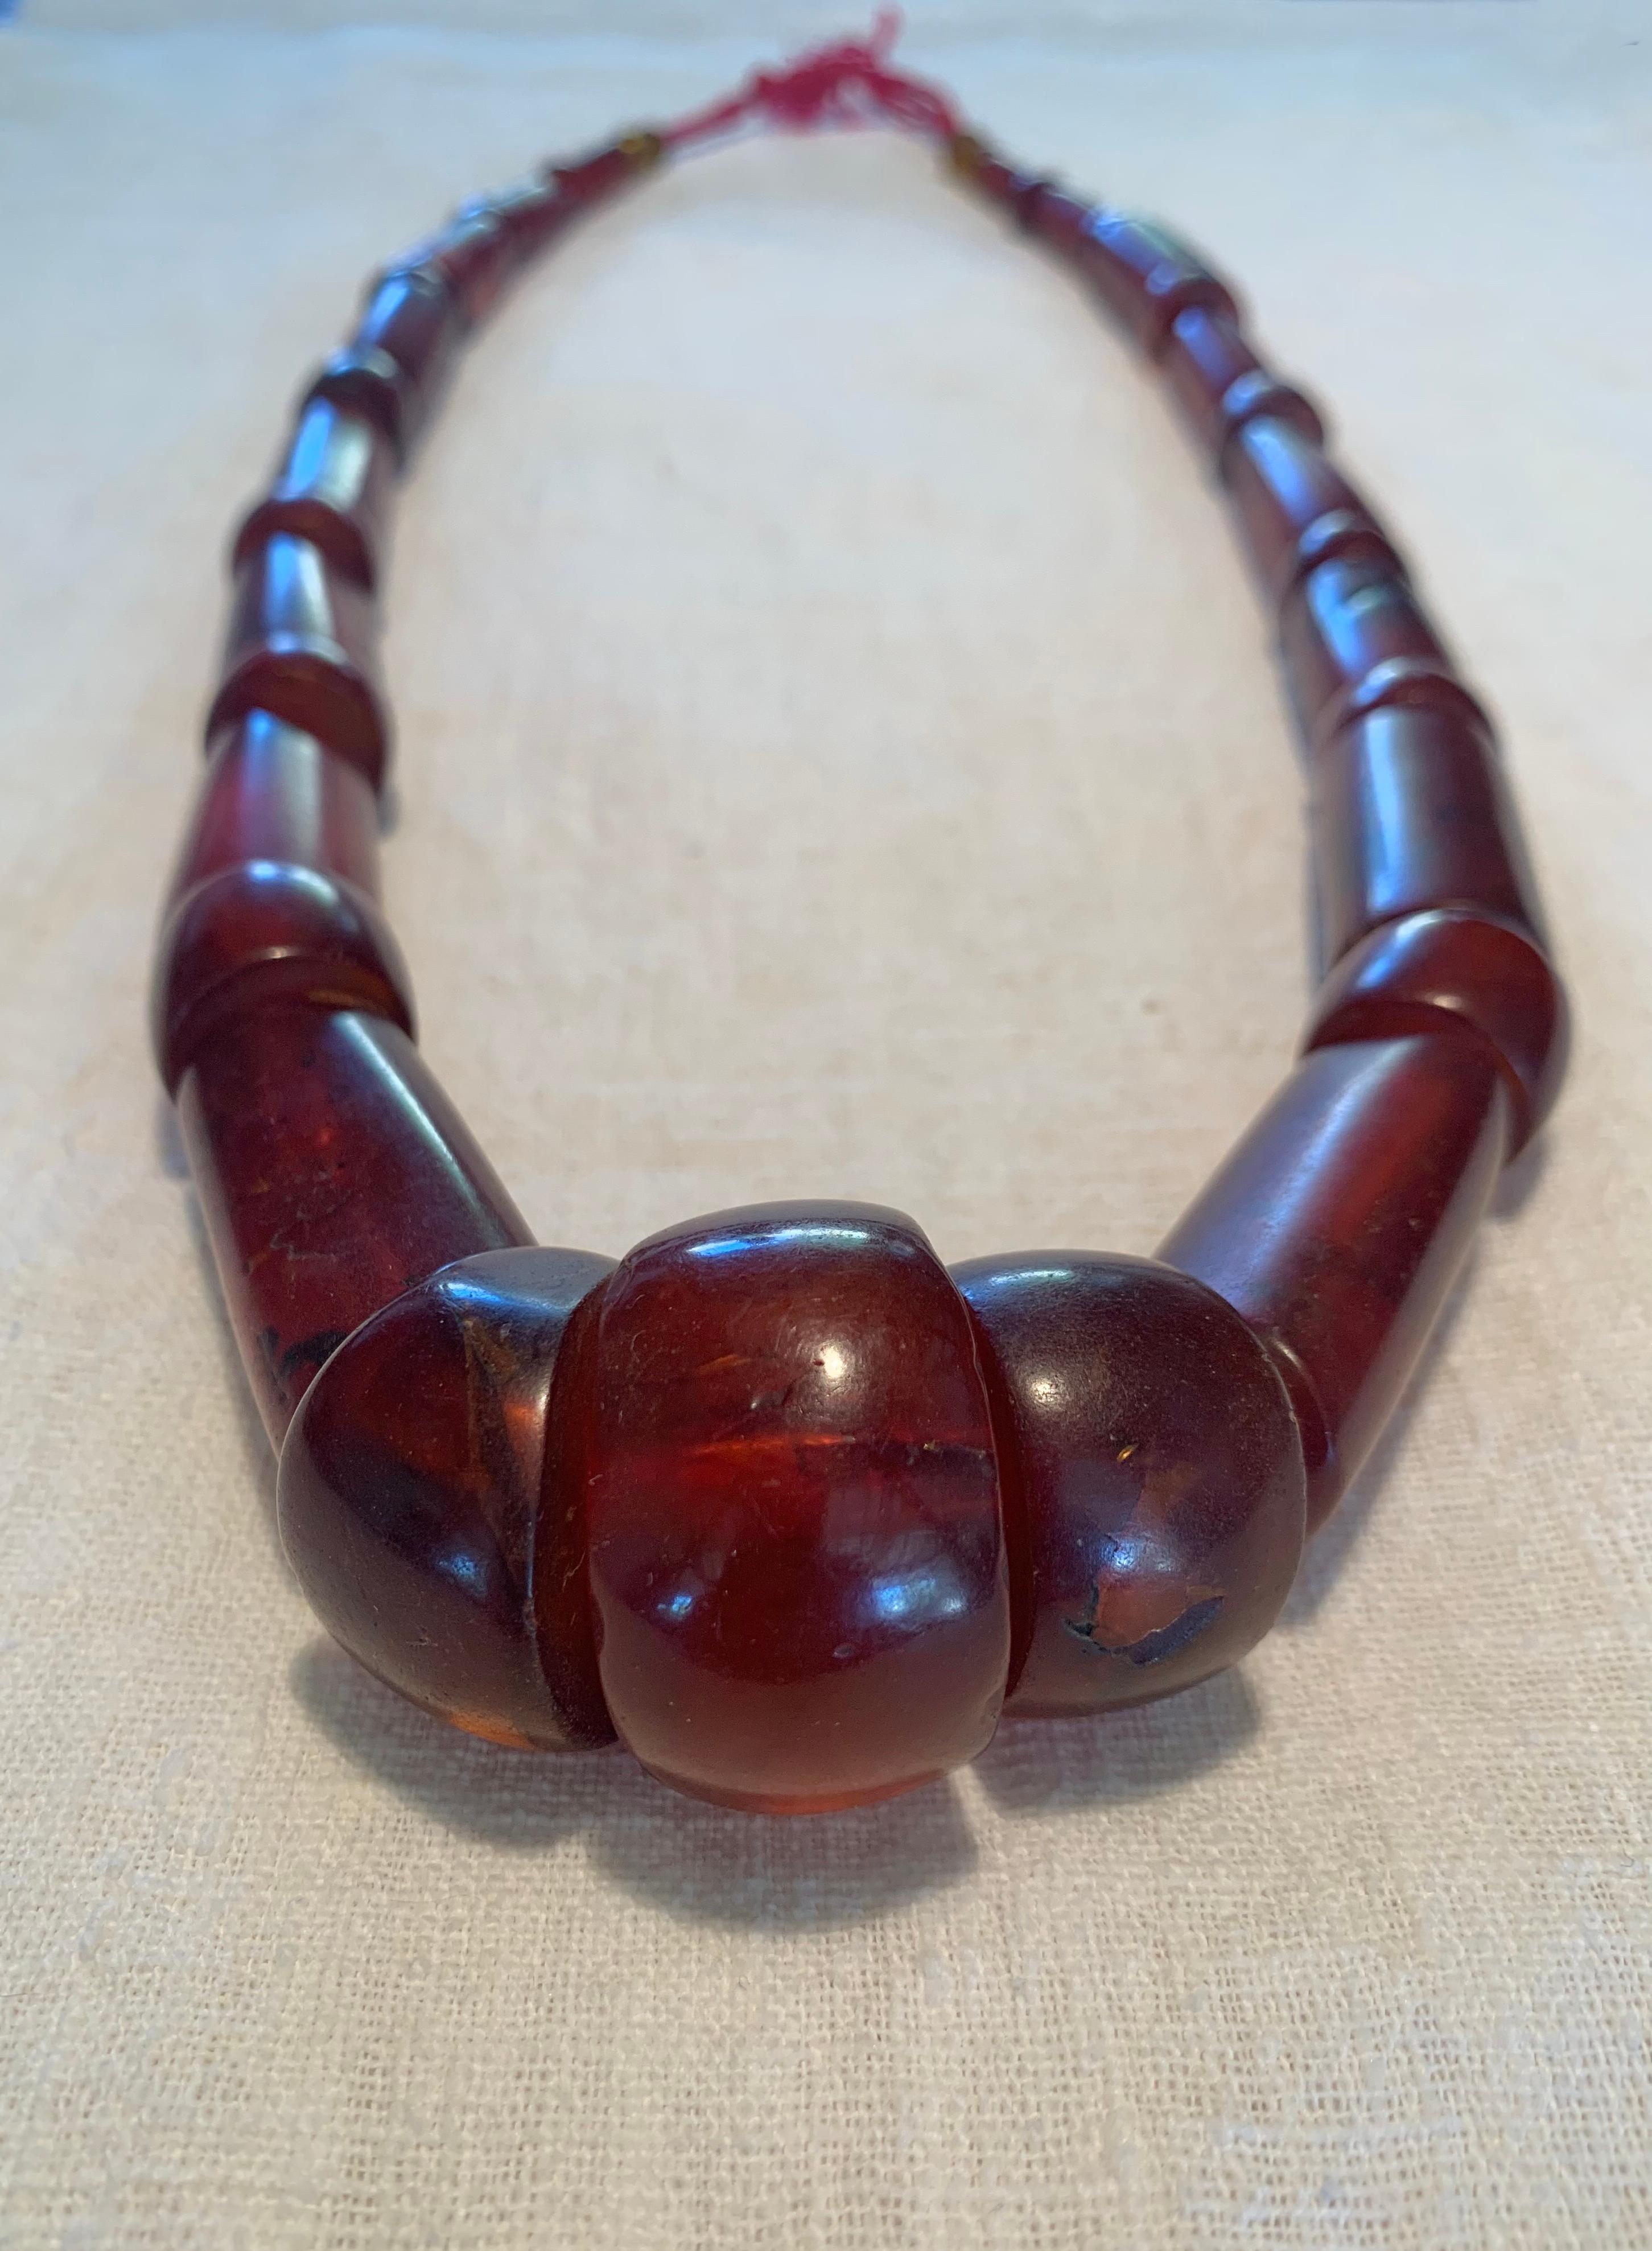 This Burmese Mizoram necklace features long, cylindrical reddish-brown amber beads. This type of amber is Burmite, a type of fossilised amber that originates from the Kachin State of modern day Myanmar. This necklace was once worn by a Mizo woman,